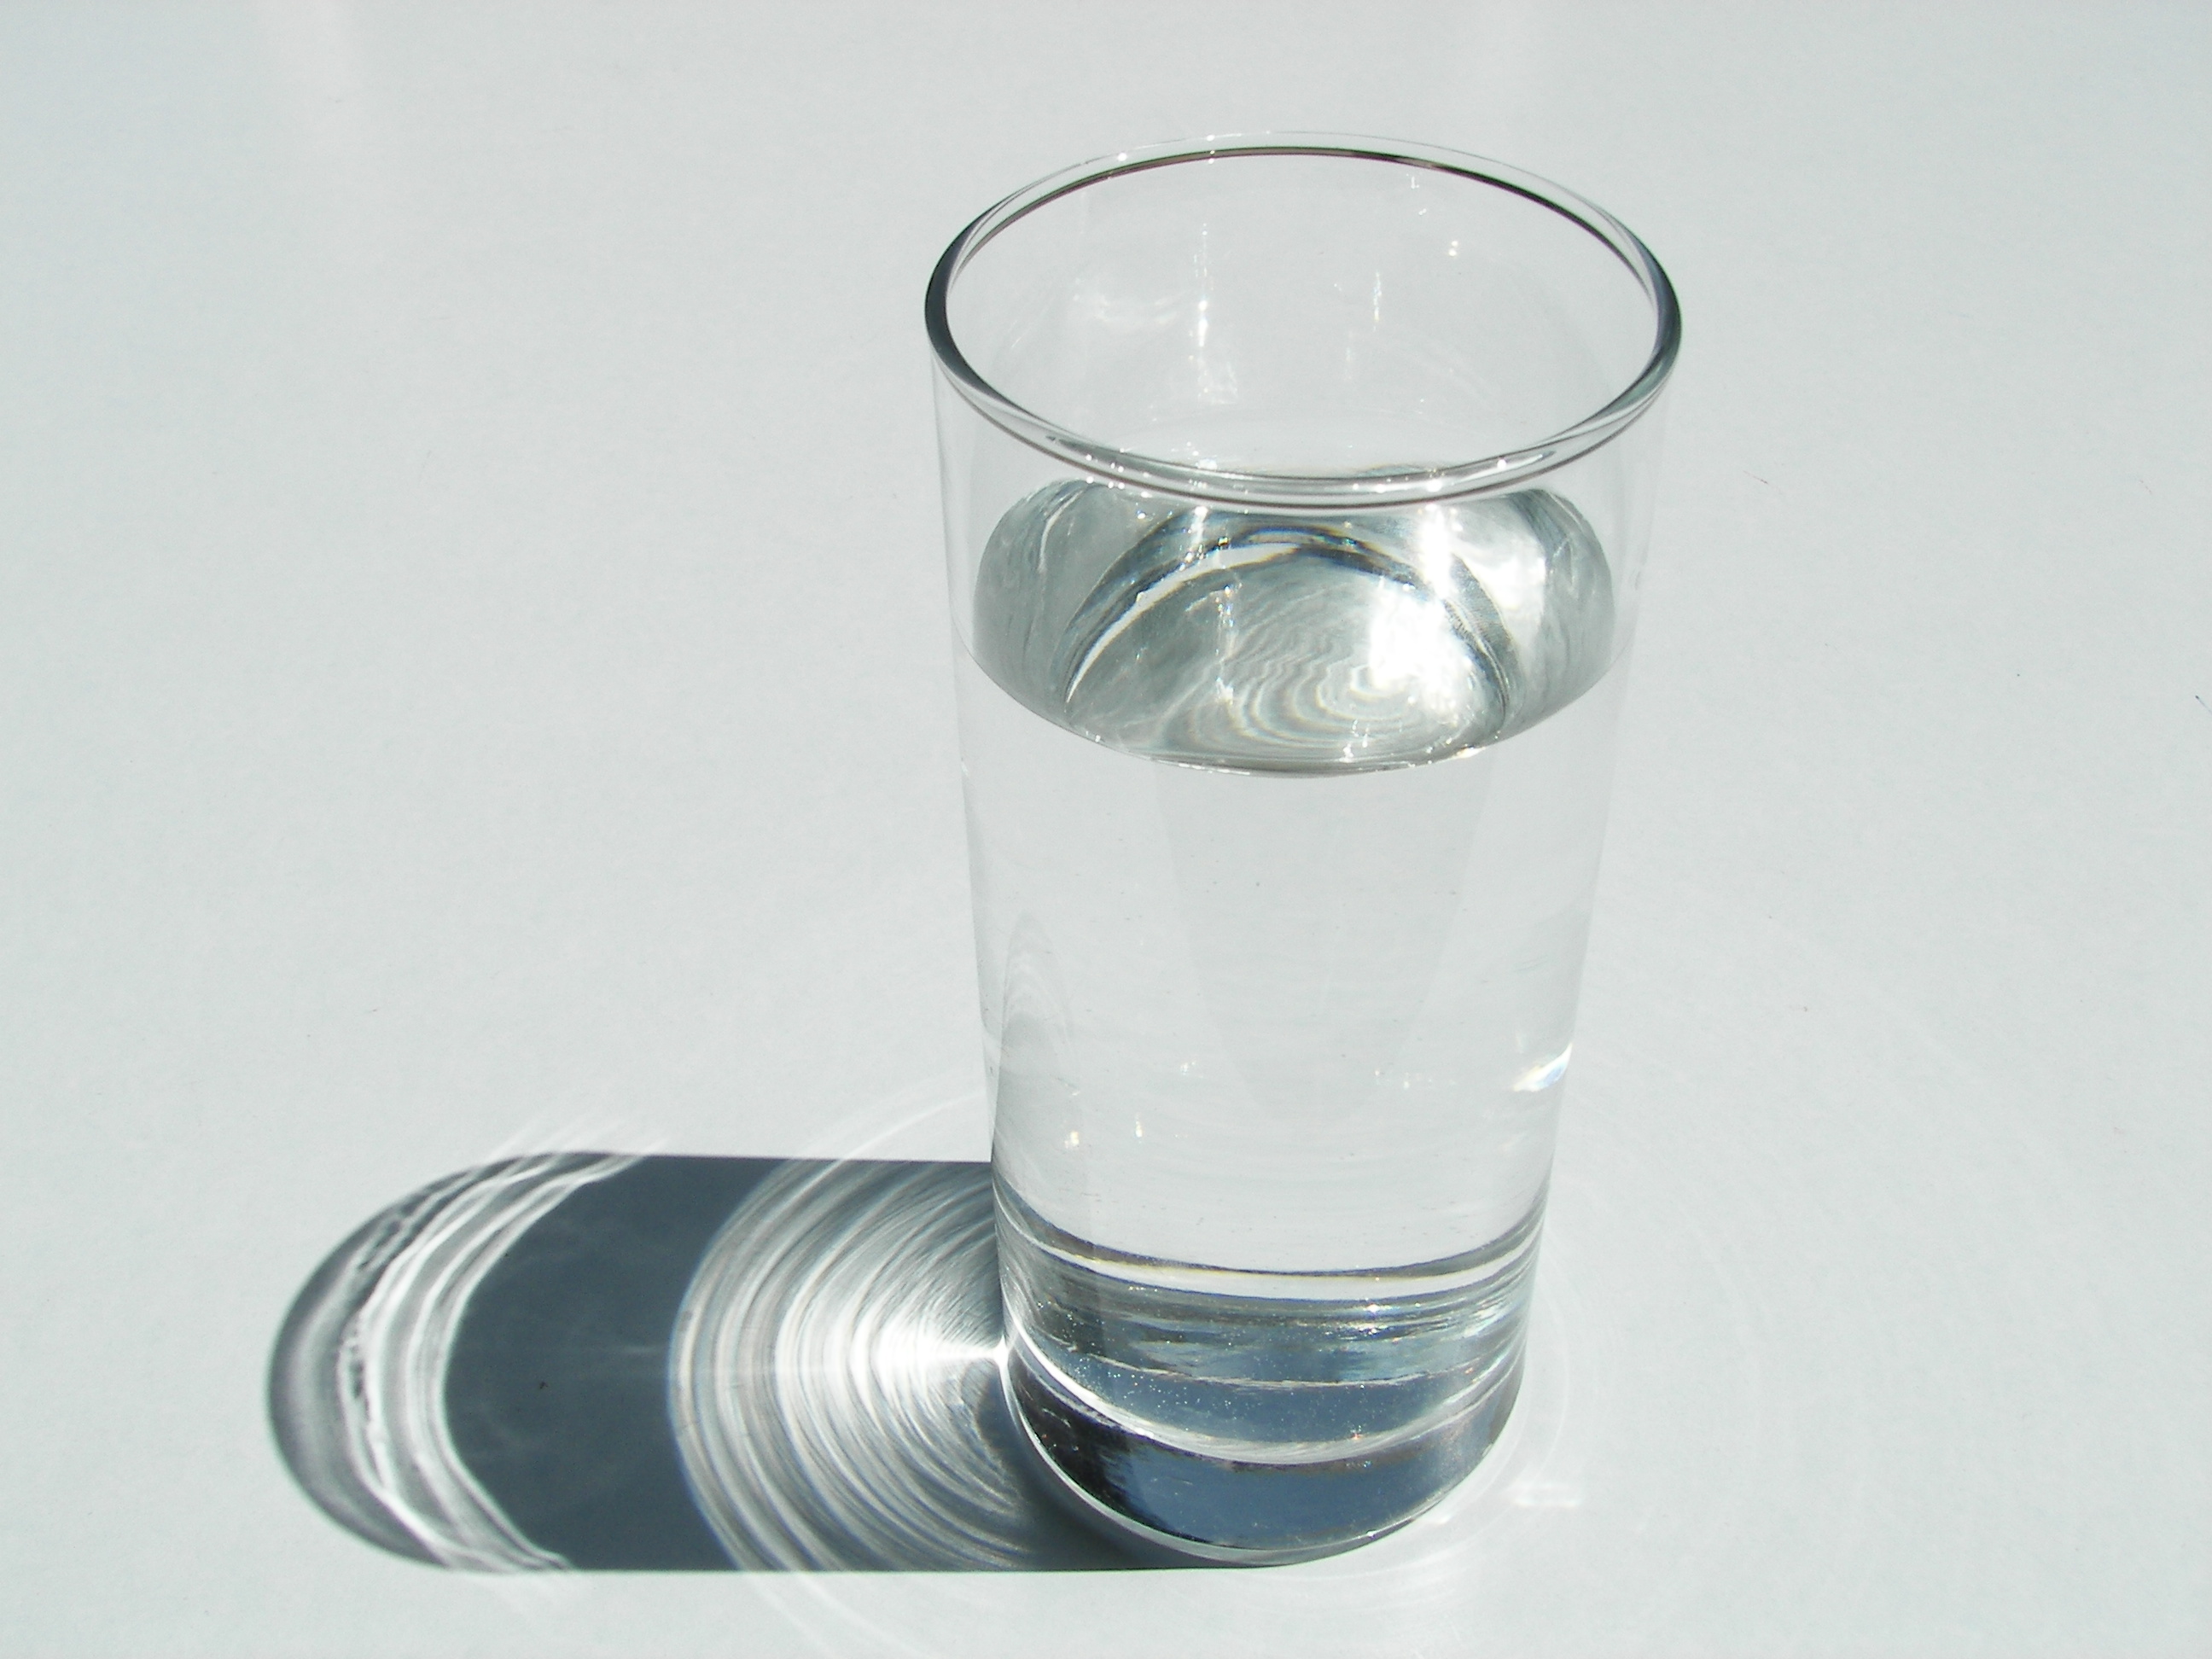 Glass of water 1